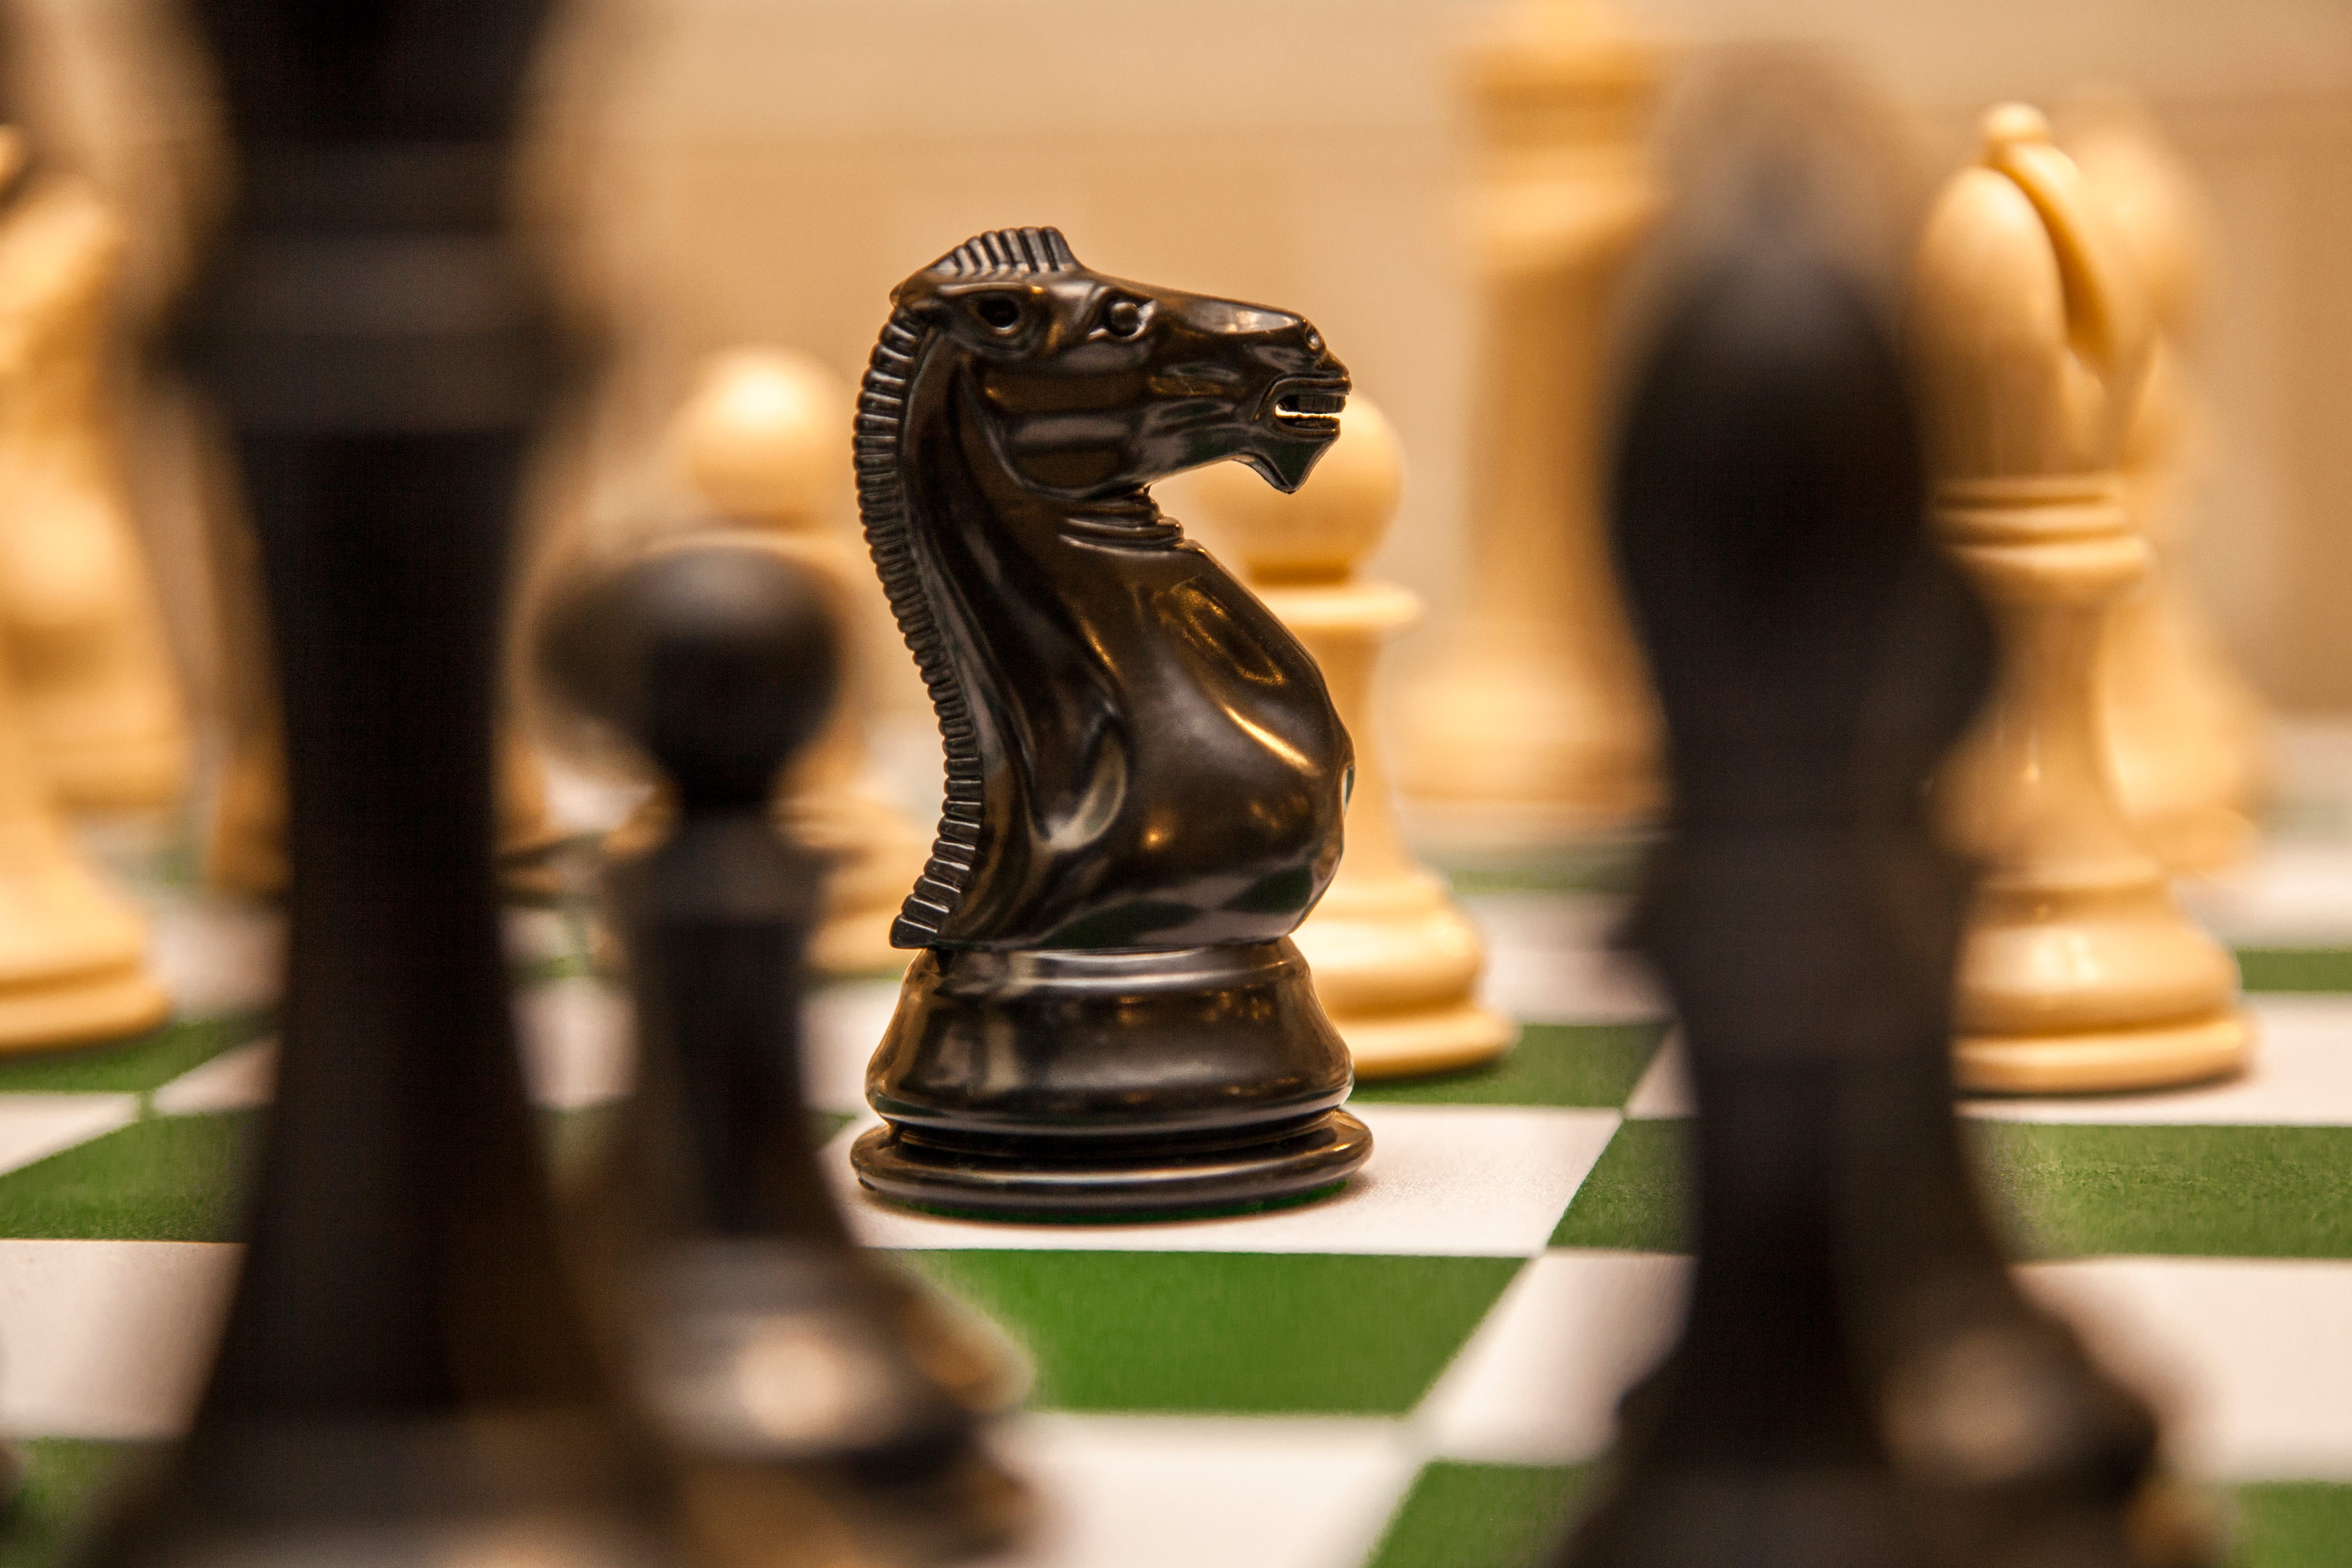 Top chess players meet in Spain to decide next world championship